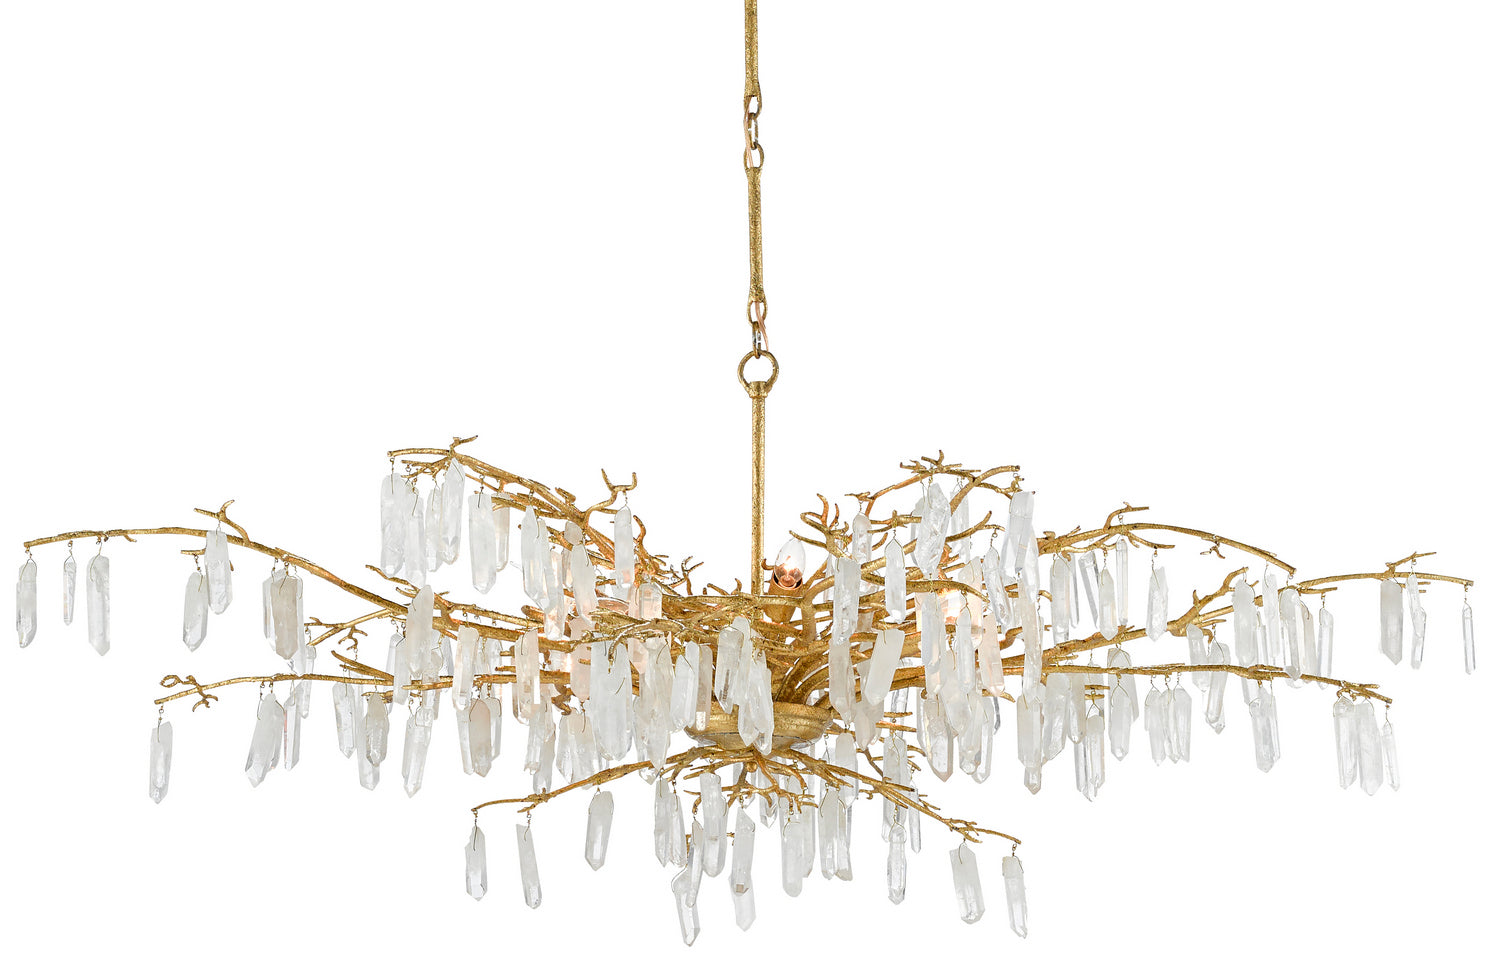 Eight Light Chandelier from the Aviva Stanoff collection in Washed Lucerne Gold/Natural finish